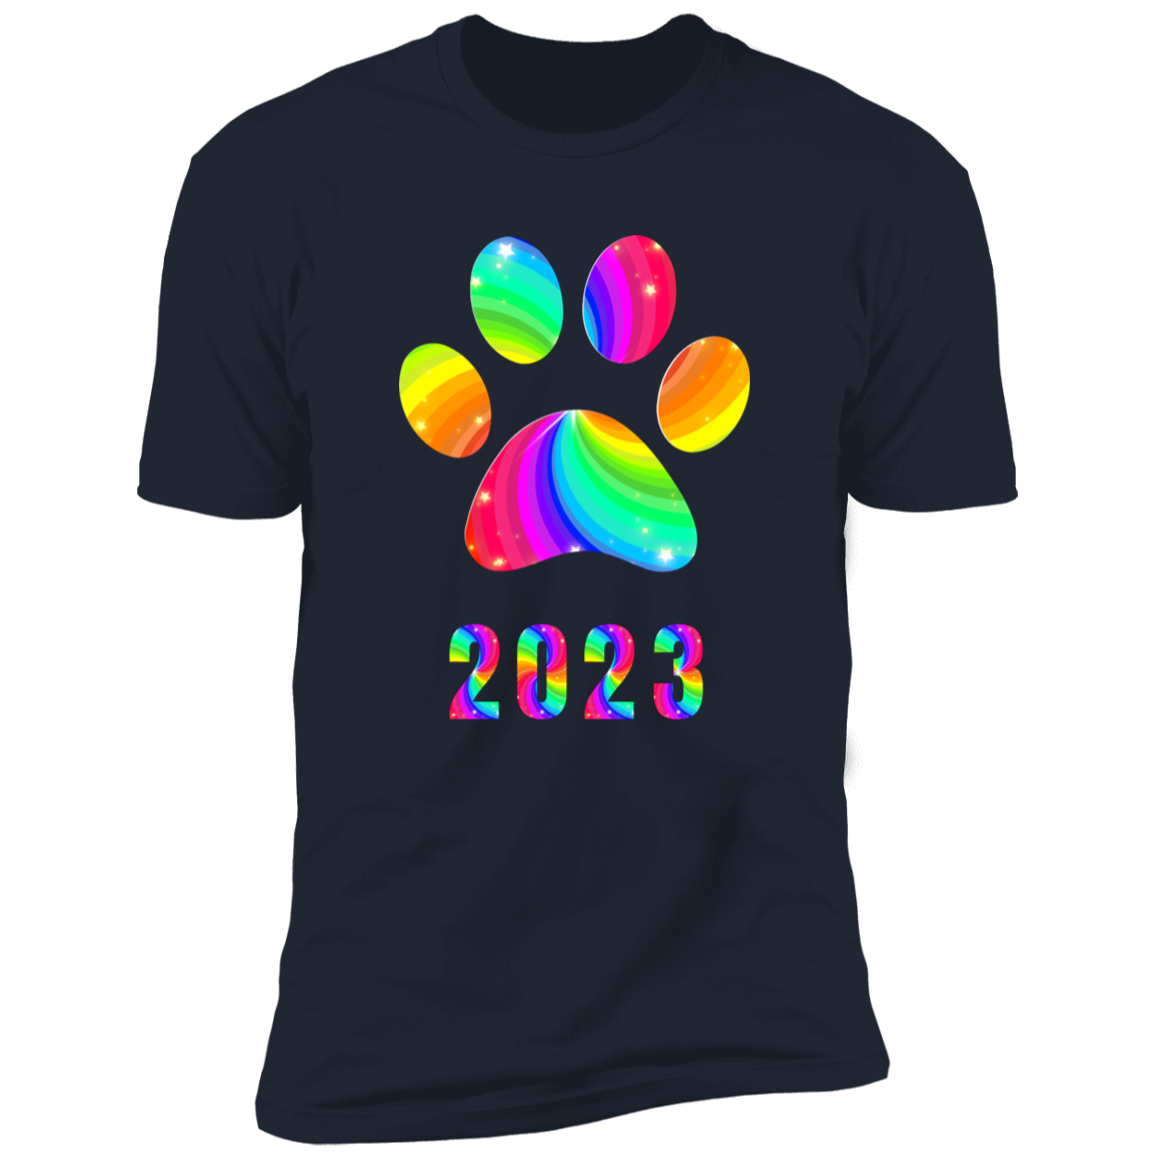 Pride Paw 2023 (Swirl) Pride T-shirt, Paw Pride Dog Shirt for humans, in navy blue